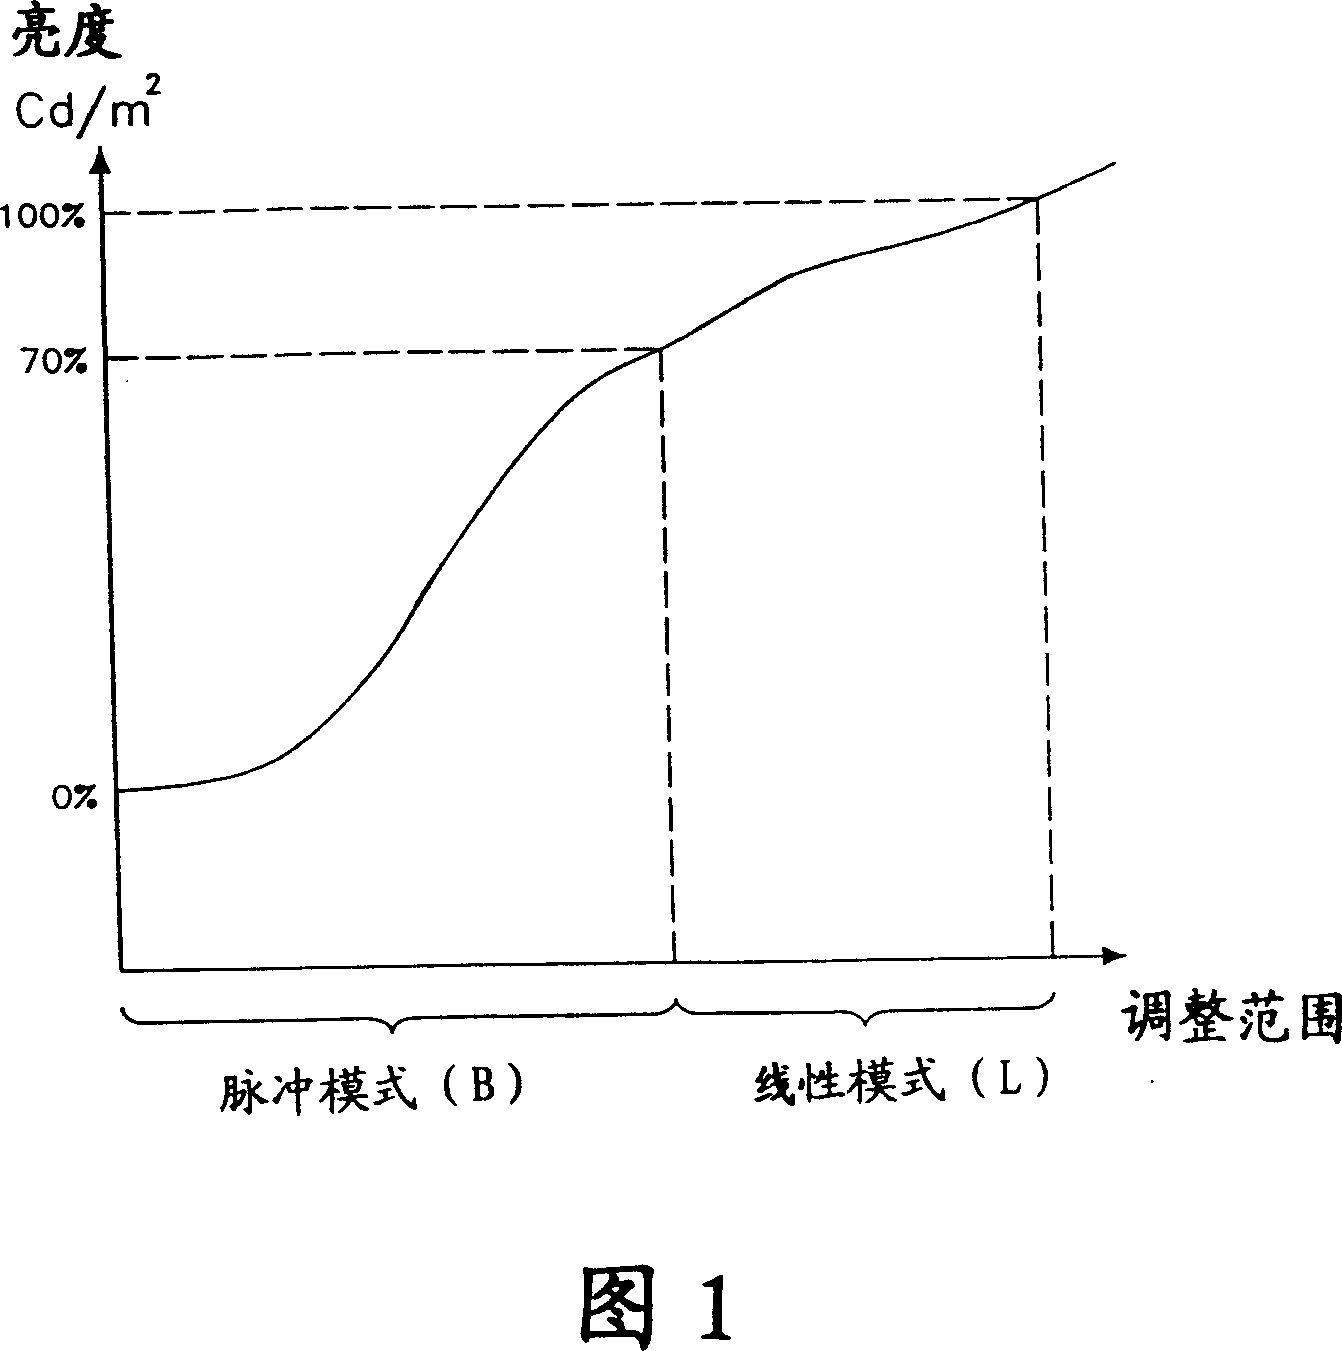 A multi-lamp dimming control method for the cold cathode lamp tube